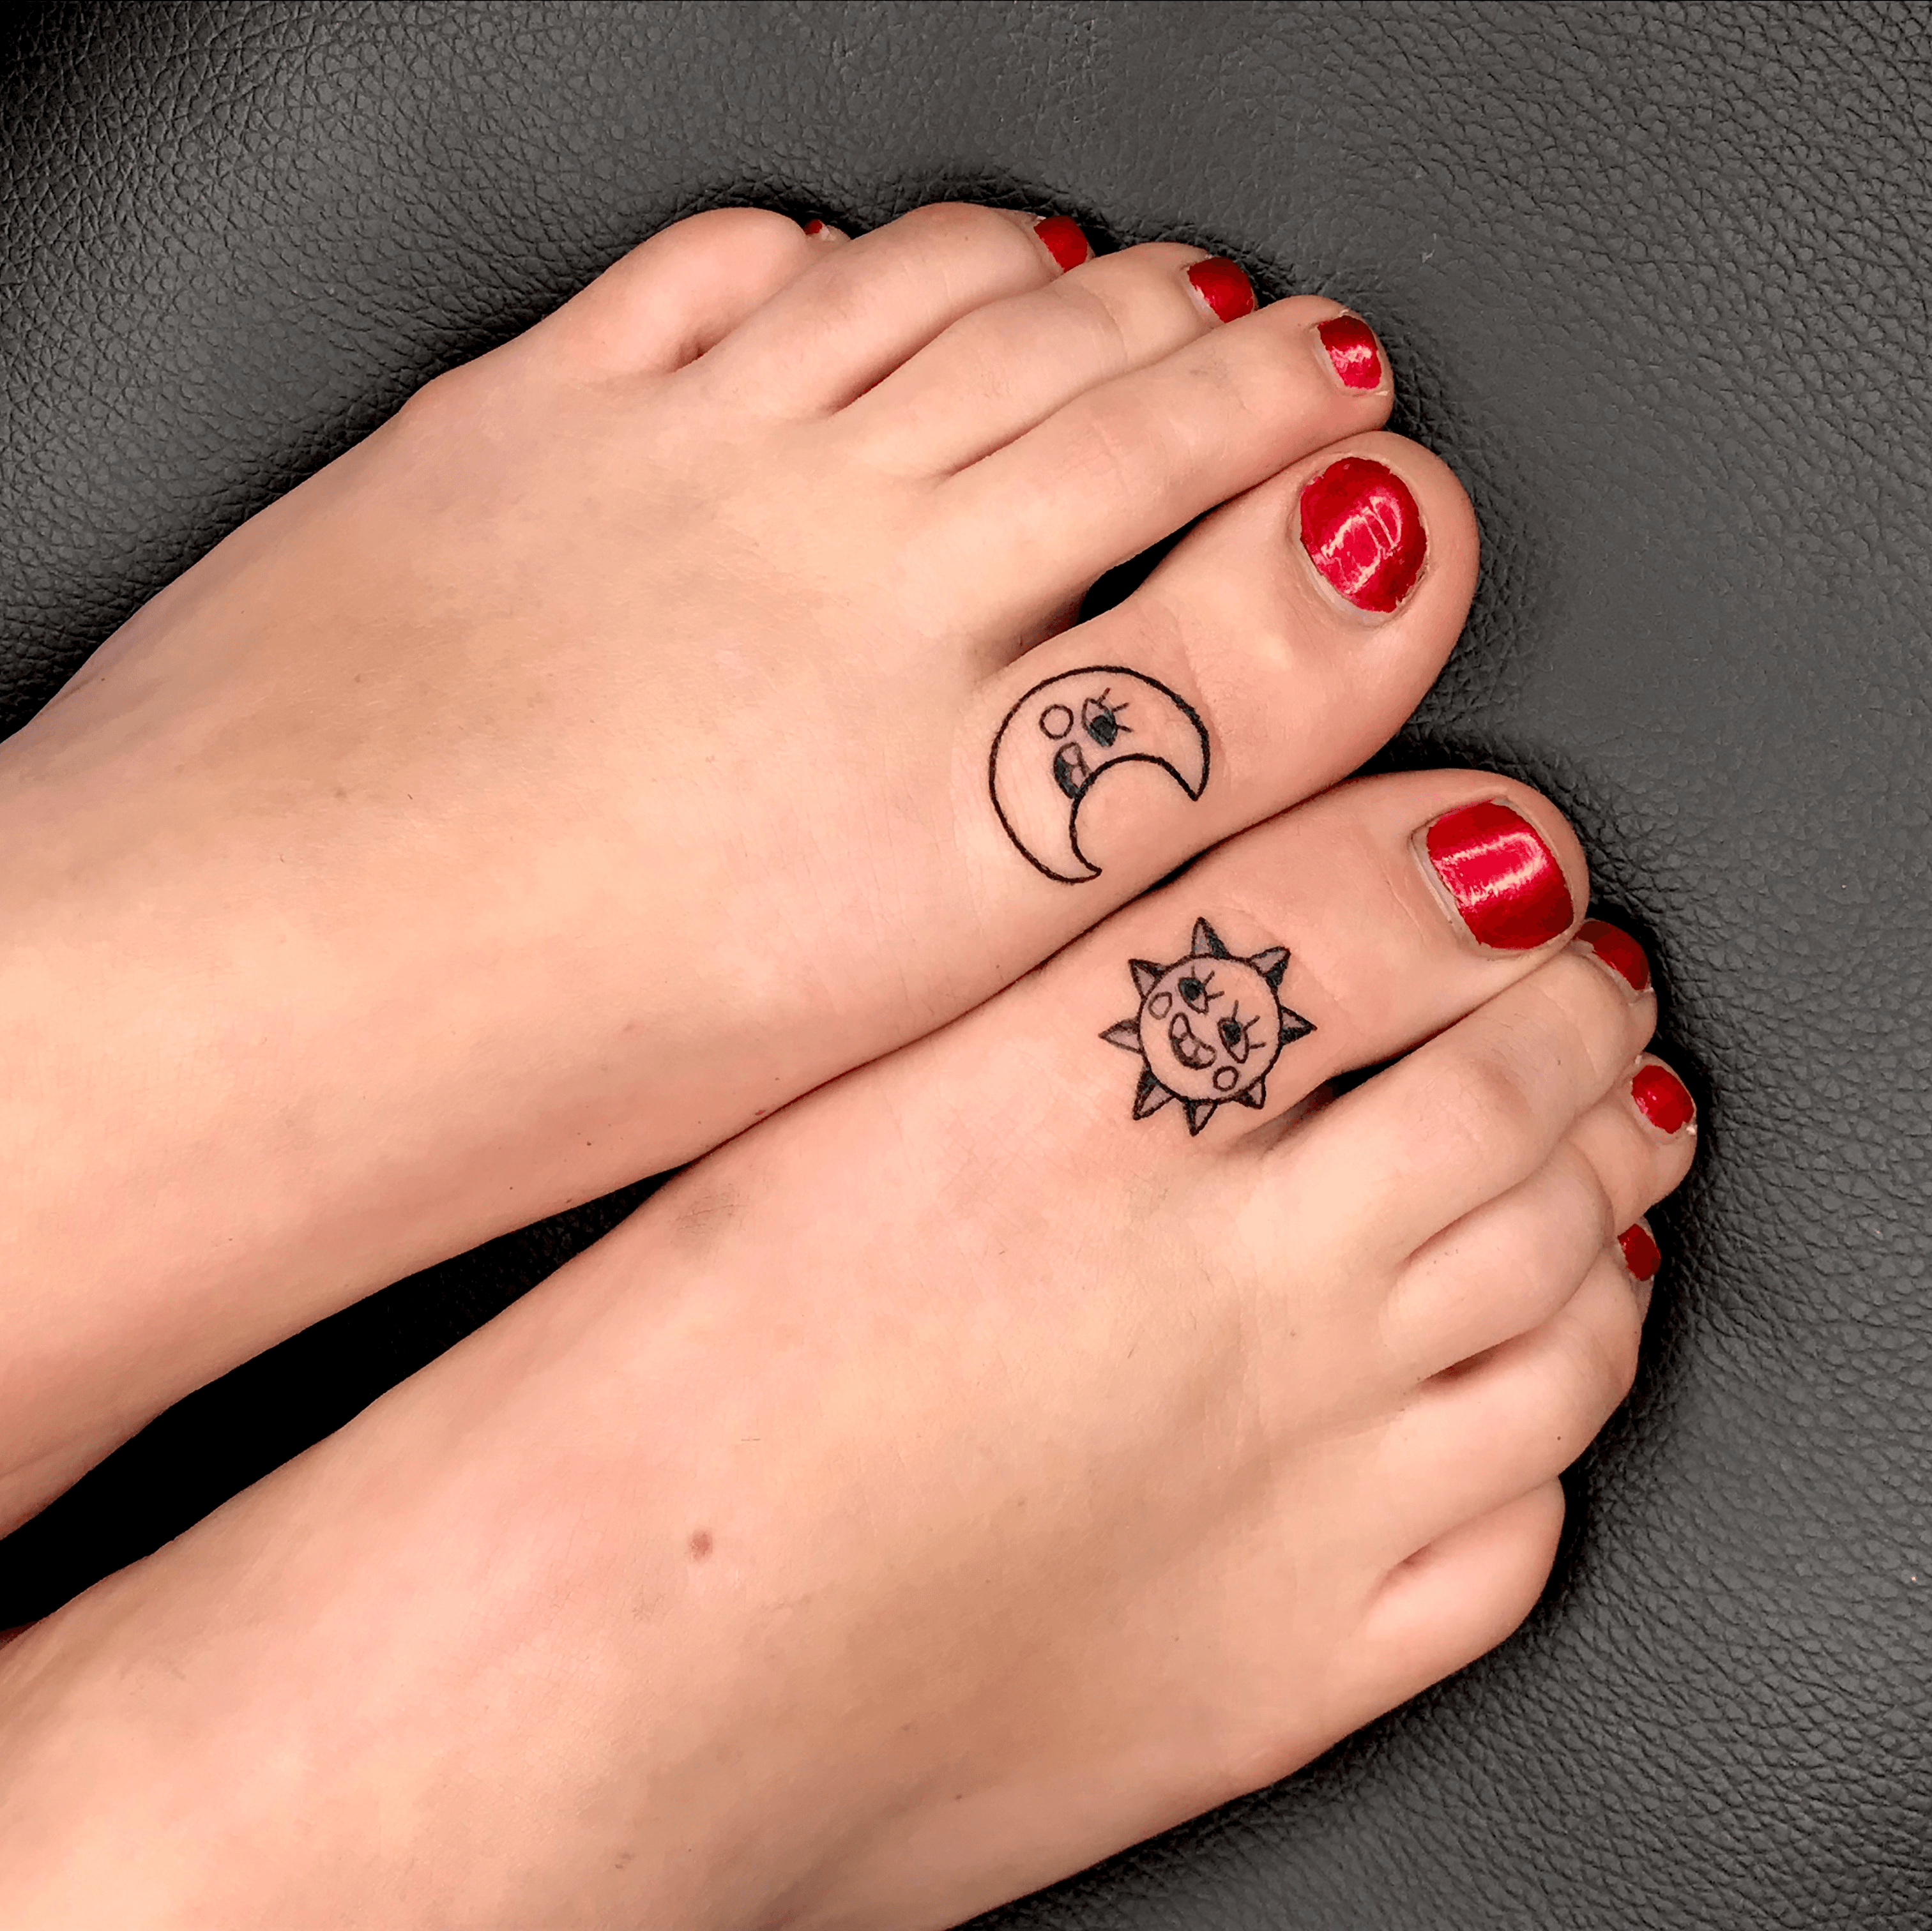 30 Amazing Foot Tattoo Designs for Boys and Girls